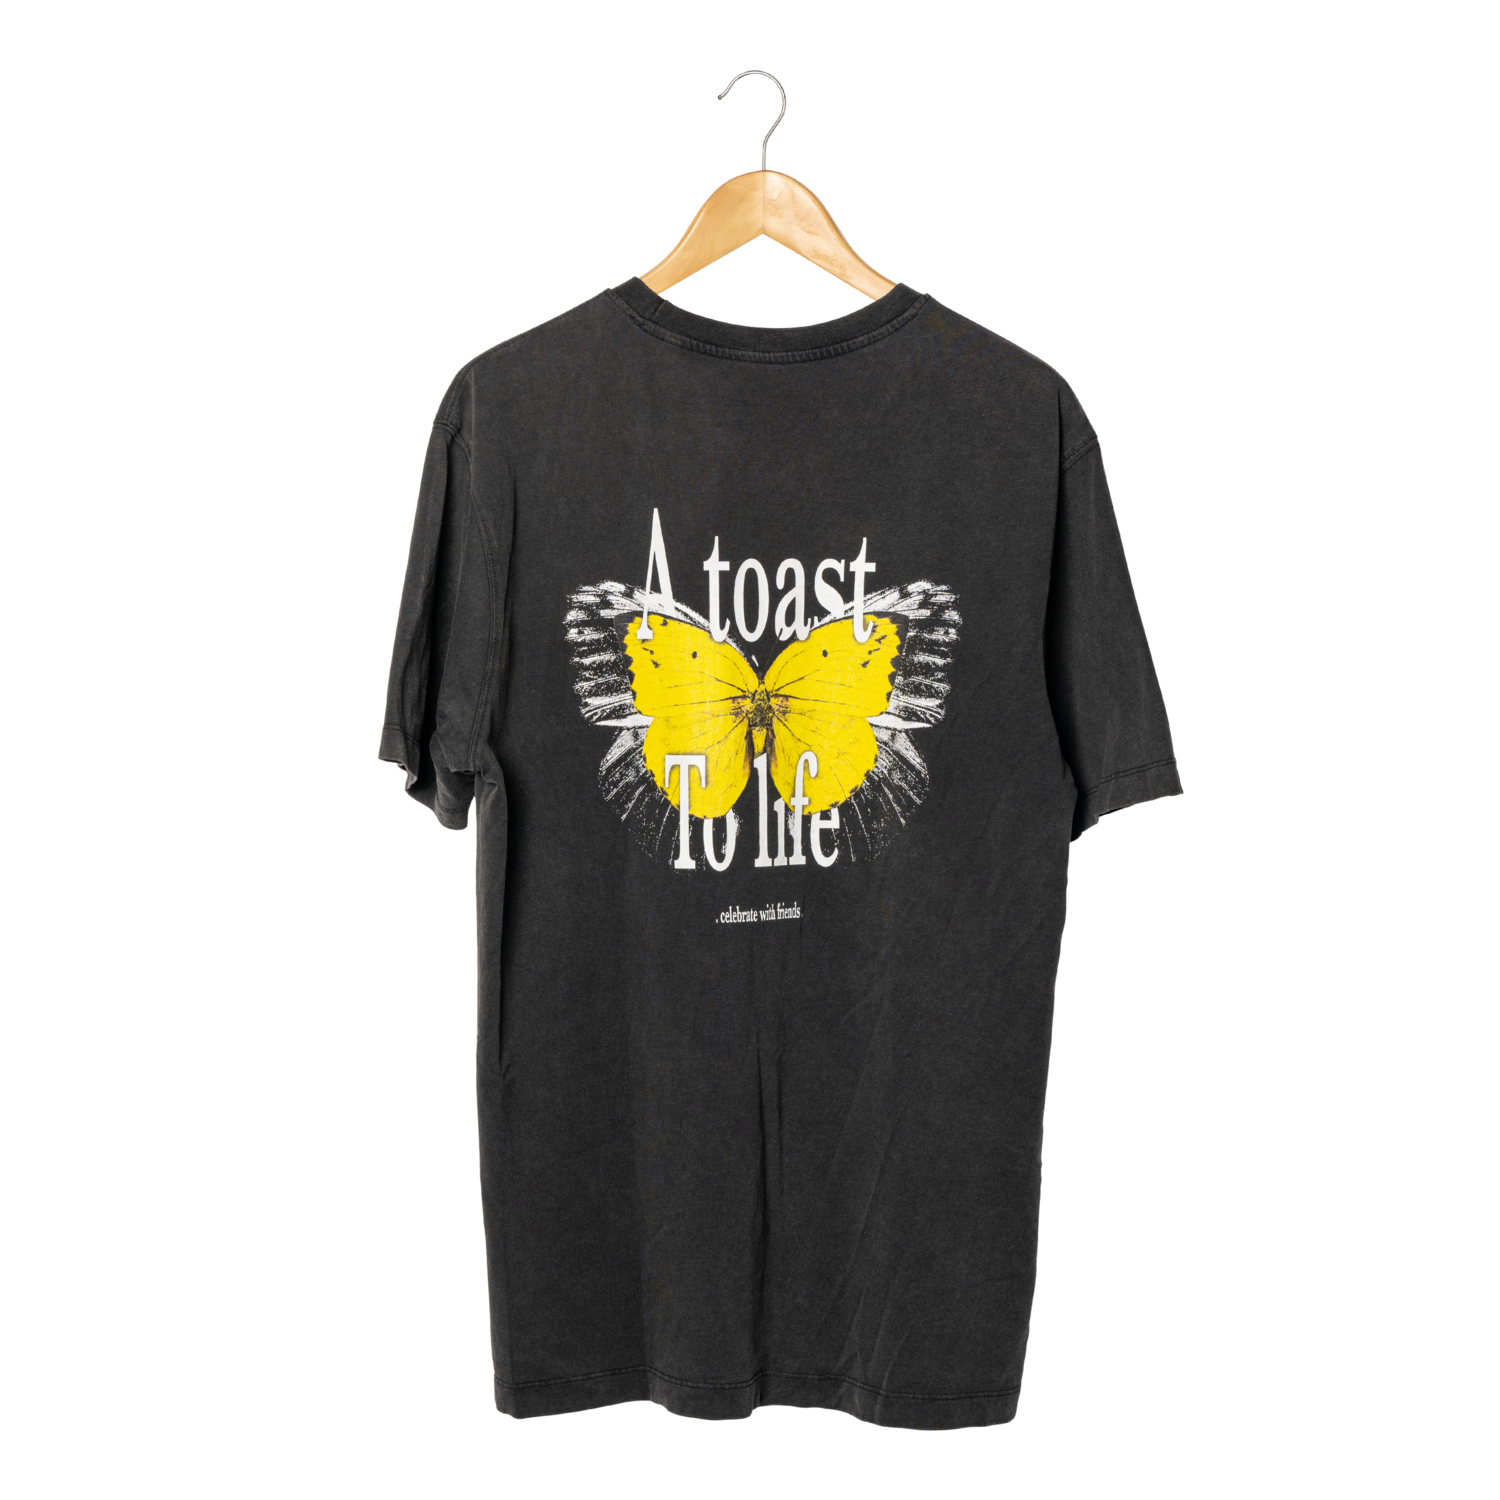 'A toast to life' T-shirt